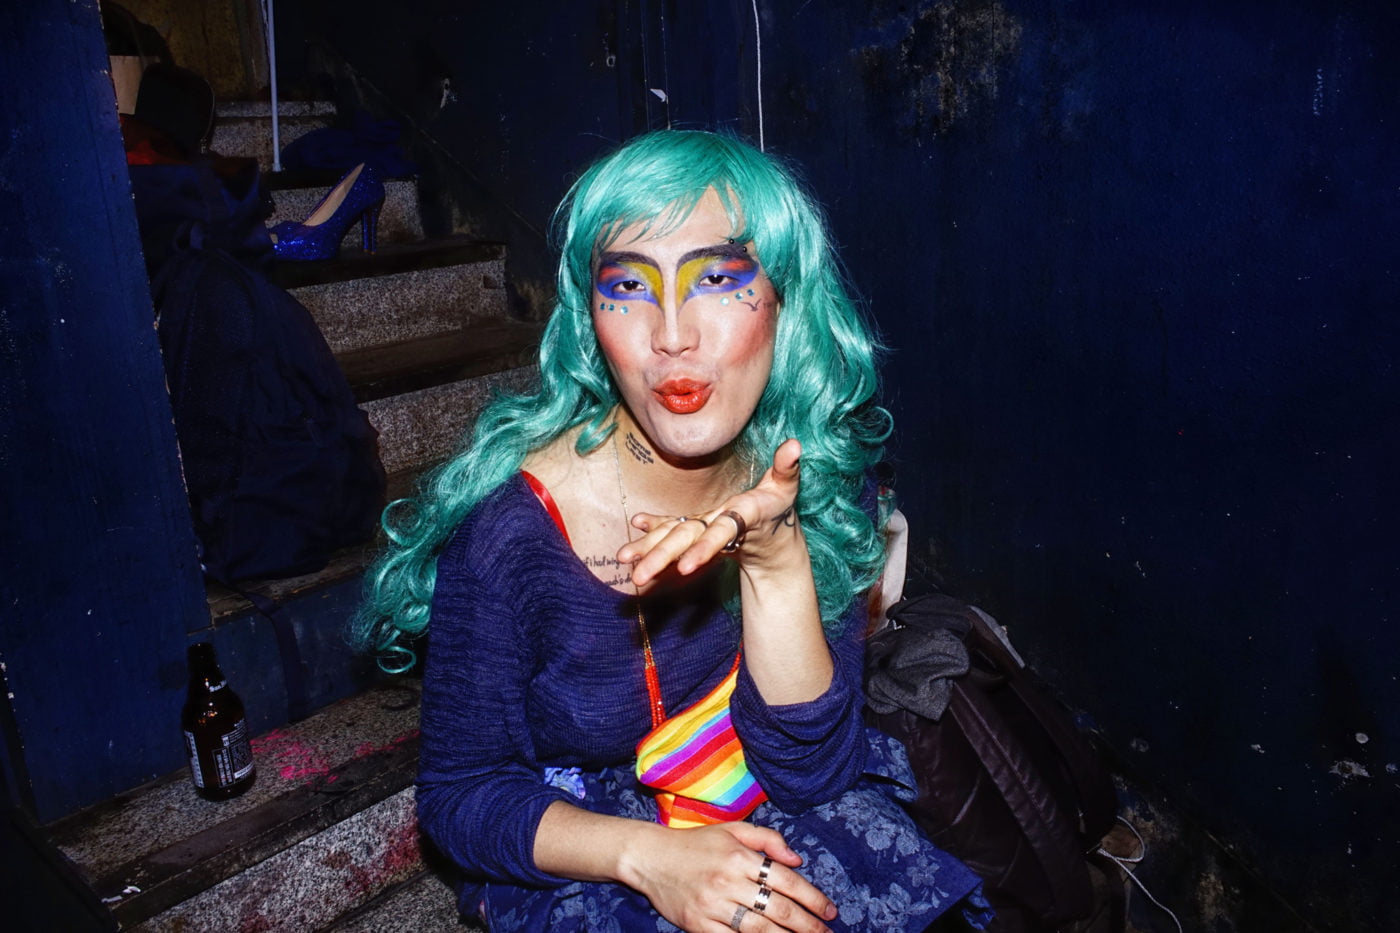 Argus Paul_Days And Nights Of A Hurricane_Portraits Of A Drag Queen’s Seoul_08